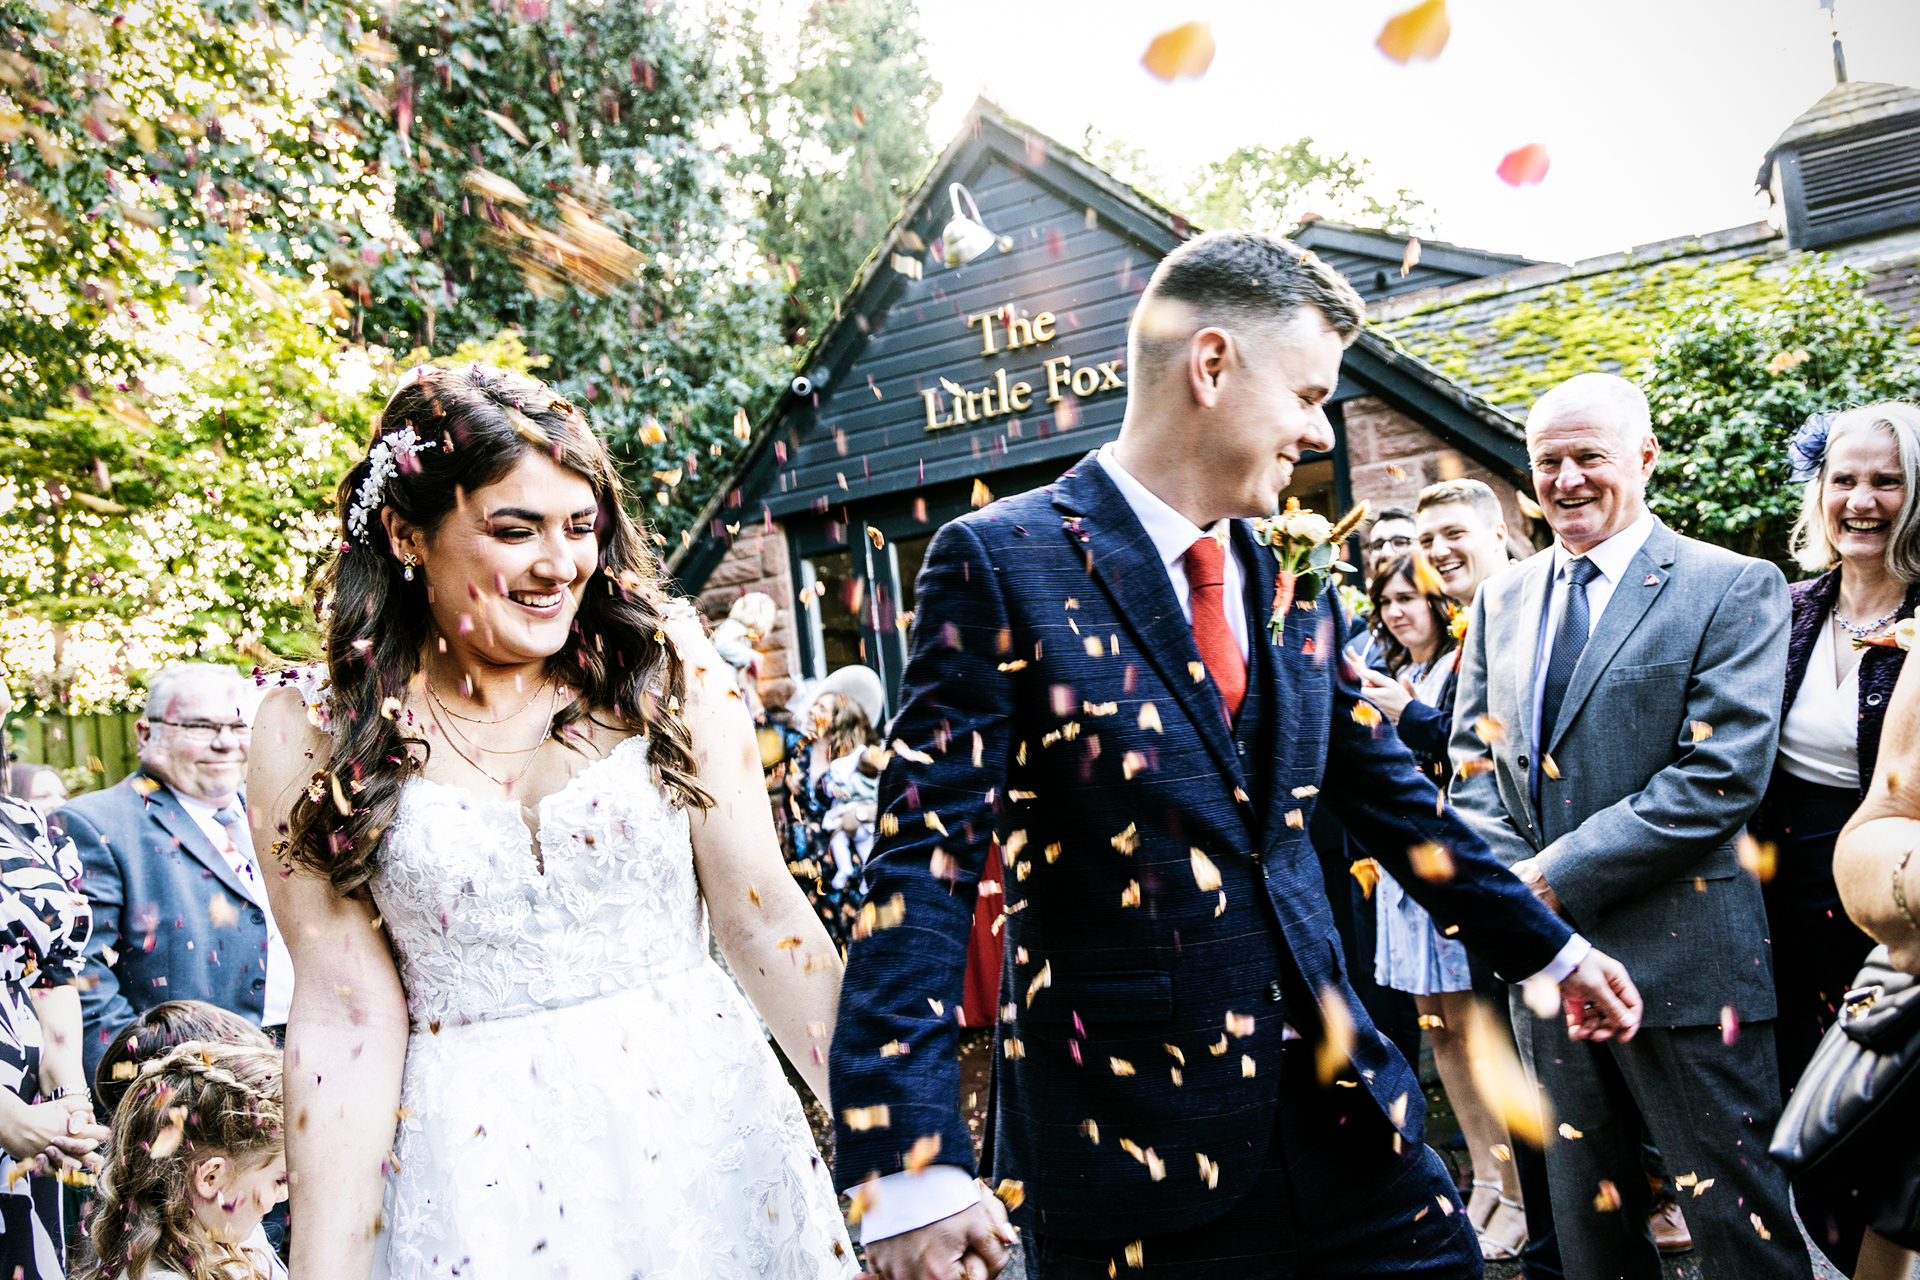 wedding photography of the bride and groom at the little fox wedding venue in wirral